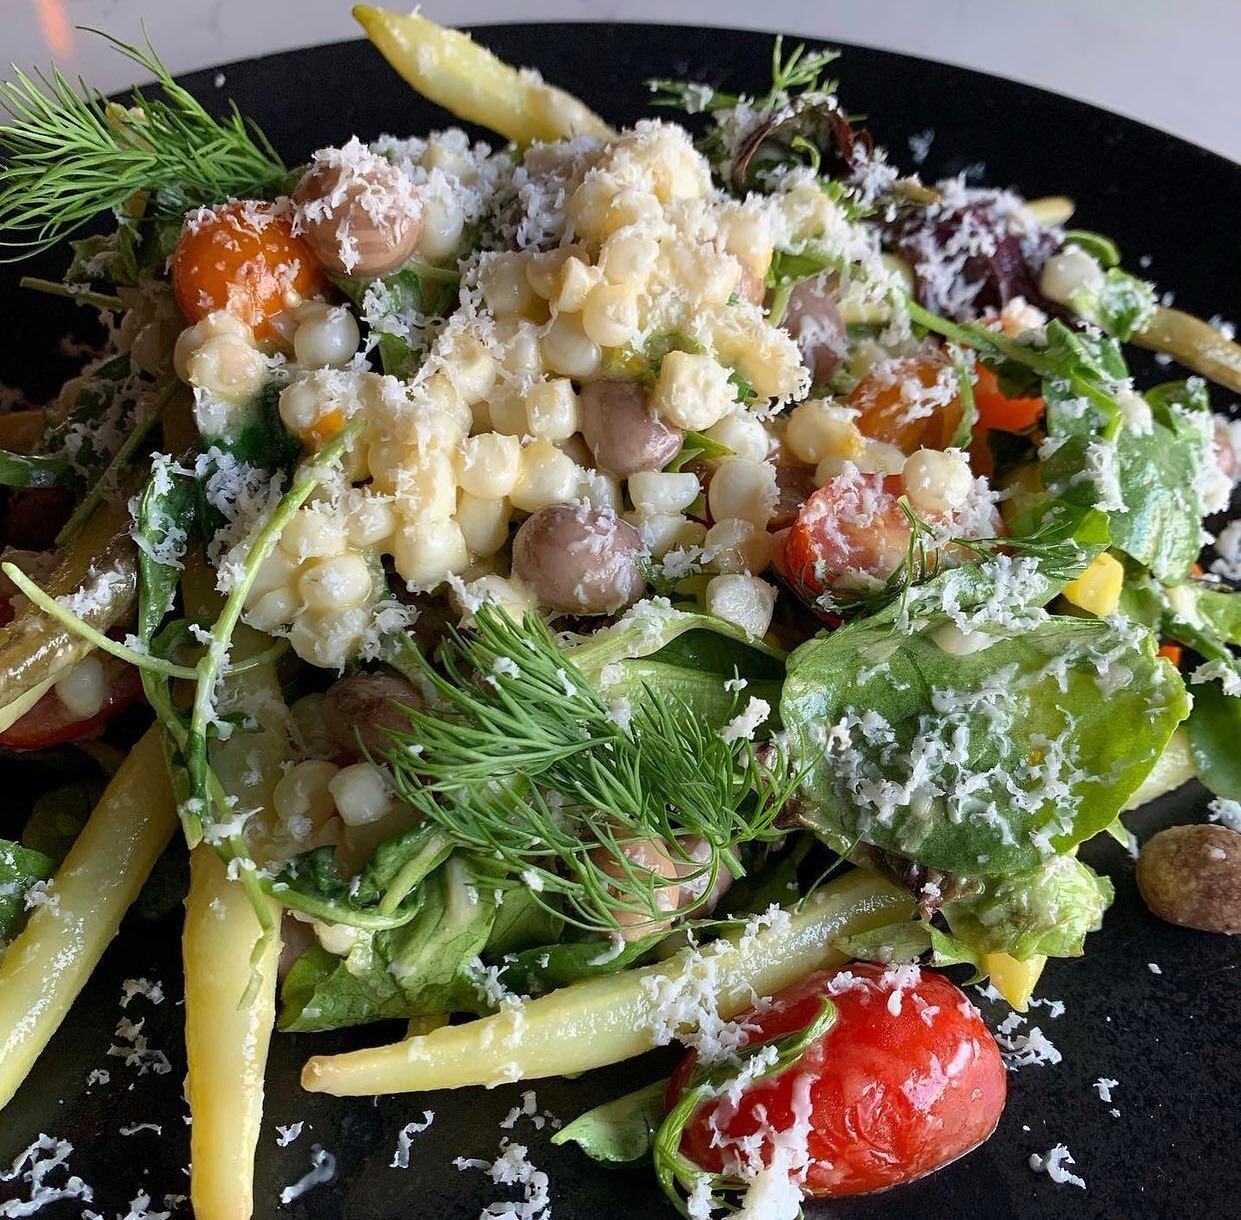 On Special this Weekend 
Summer  Salad 
Wax Beans | Pickled Green Beans | Barlotti Beans | Fresh Corn | Heirloom Tomatoes | Dill | Shaved Gorgonzola Dolce | Cantaloupe Dressing